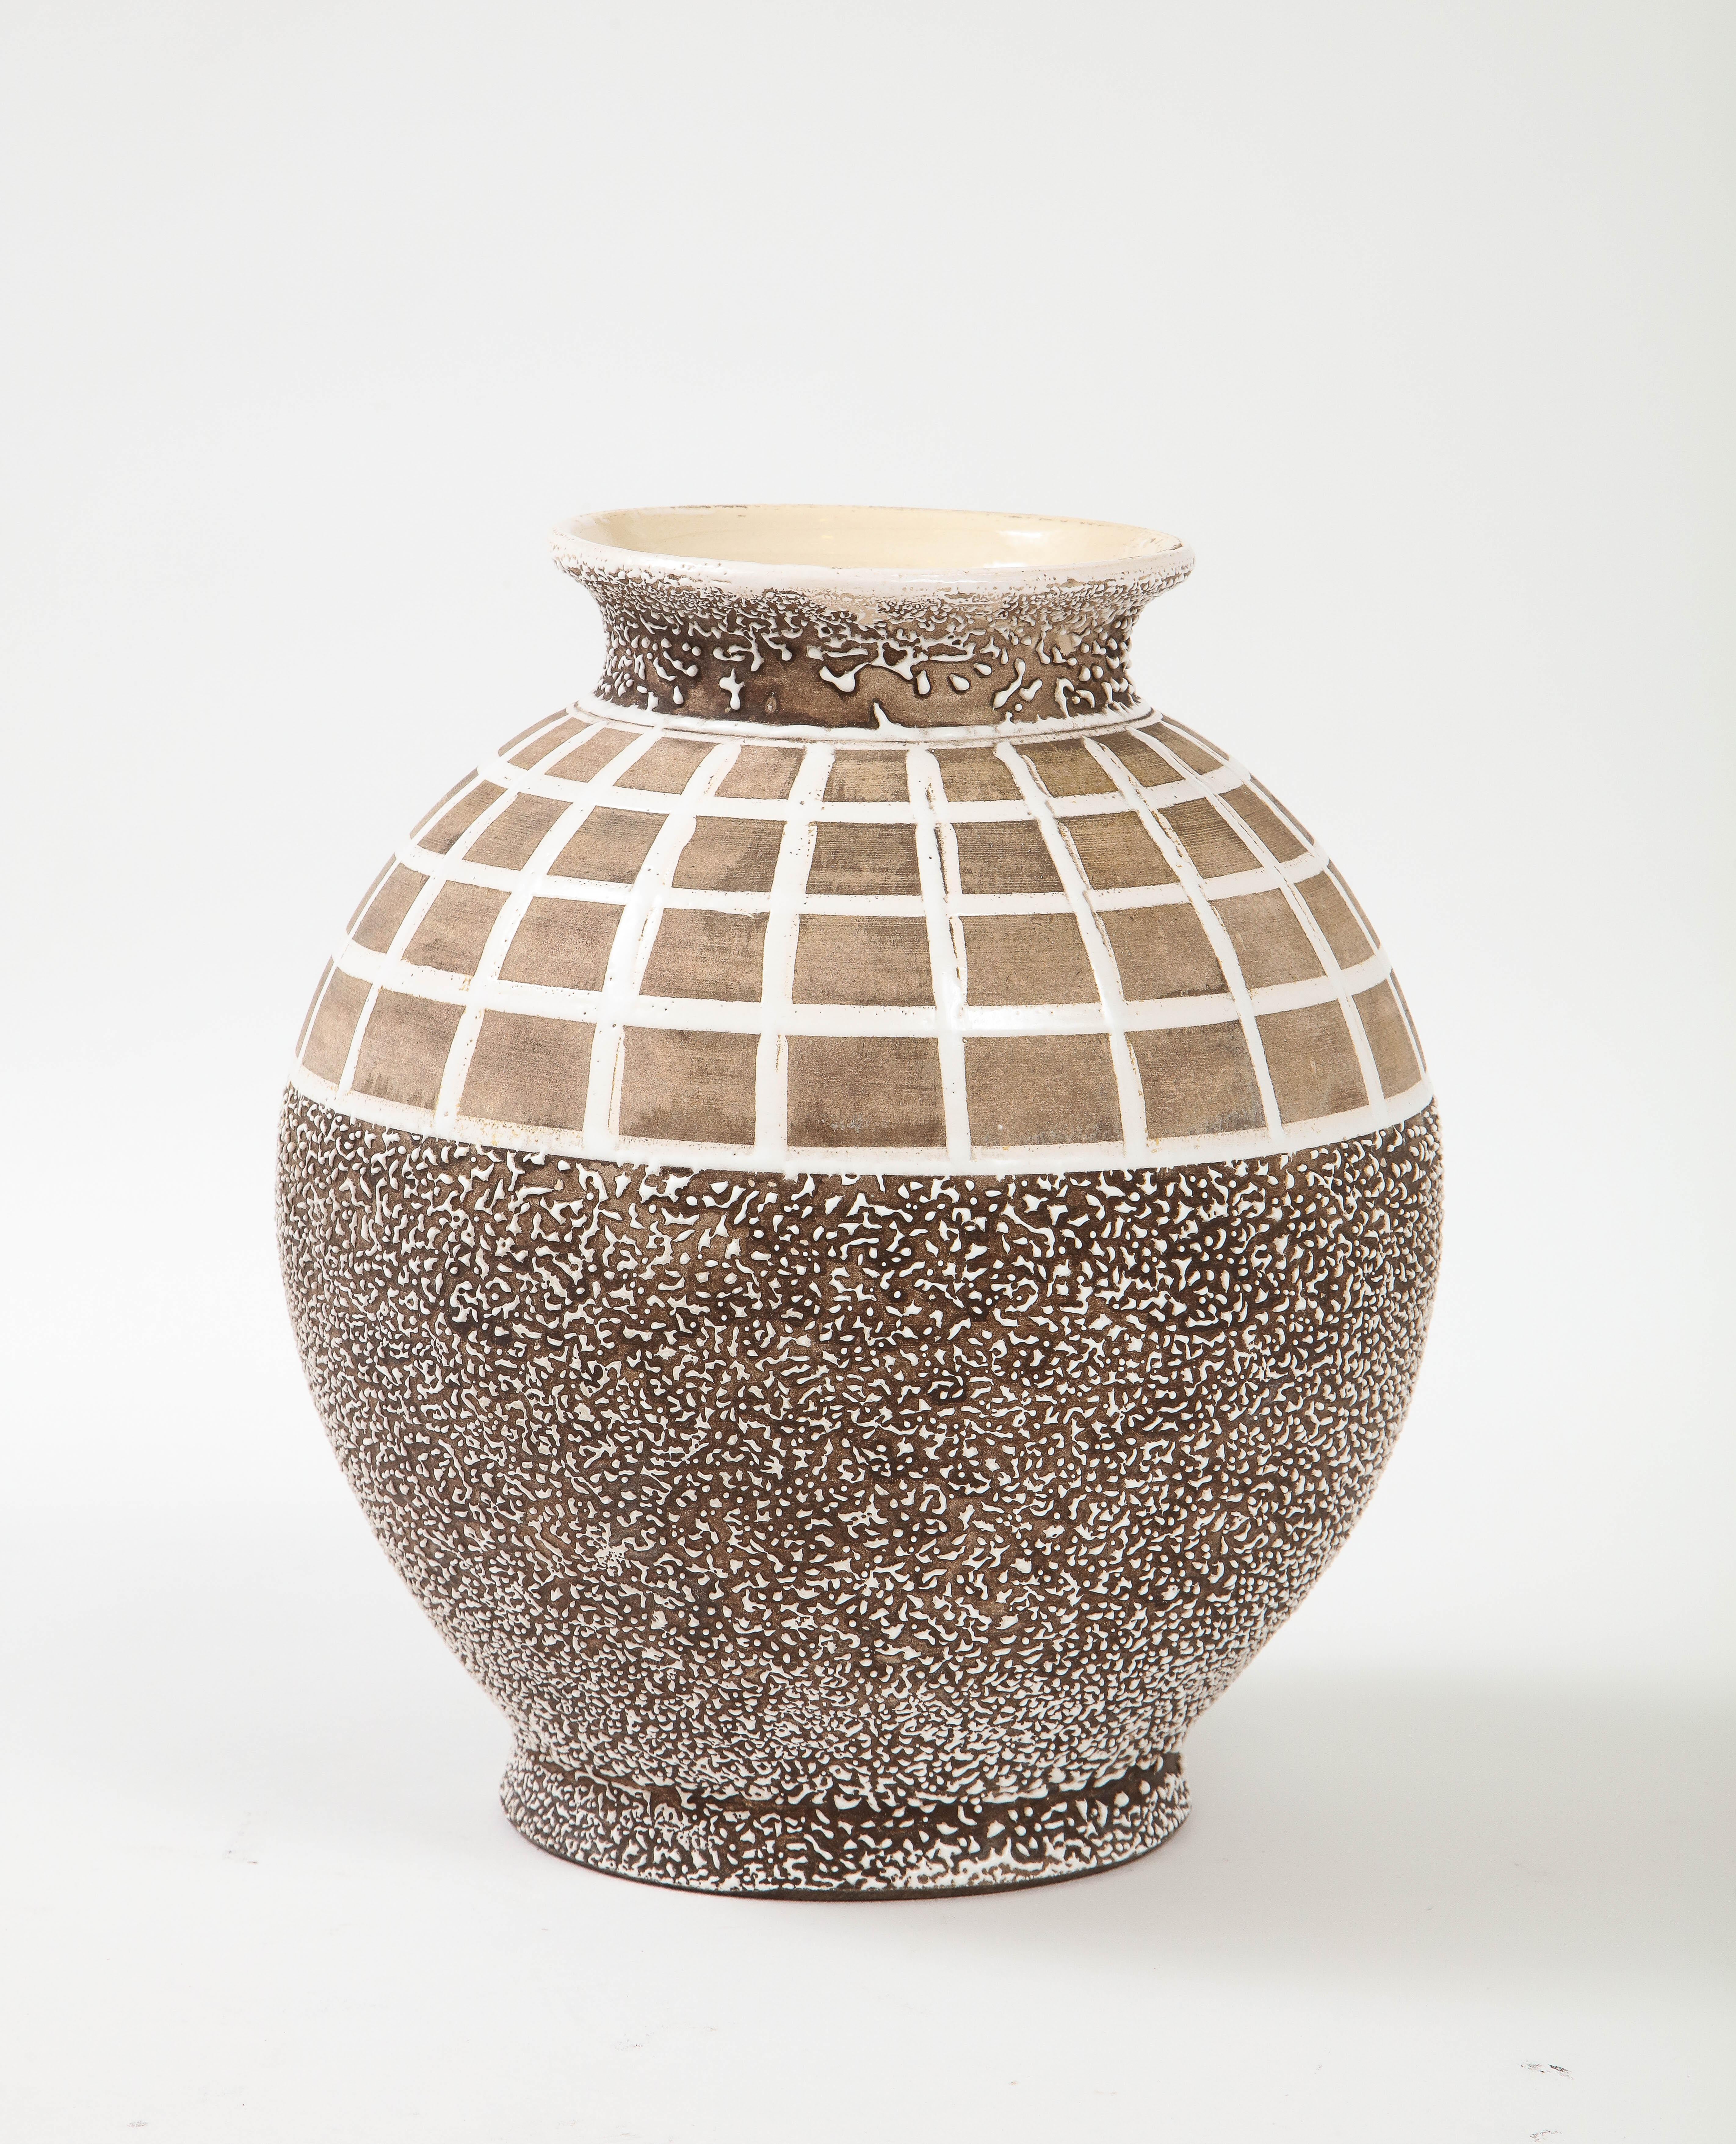 Very large for this type of vase, and unusually juxtaposed with the lattice work enamel design on the upper quadrant with dry under glaze contrasting the lower texture section.